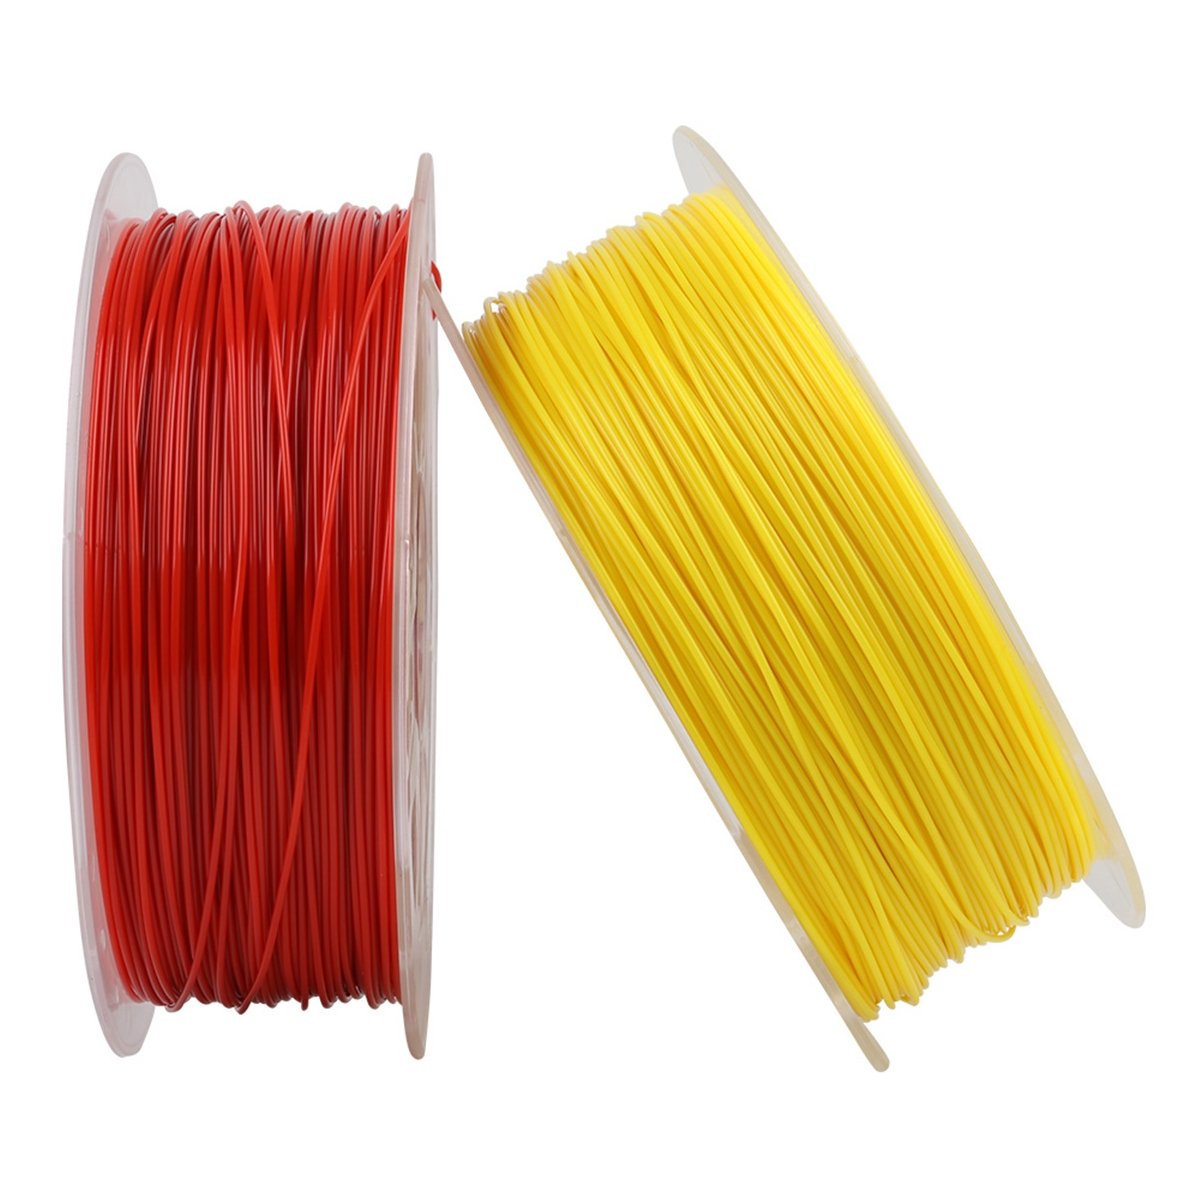 PLA Filament For 3D Printer, White/Black/Yellow/Blue/Red 1.75mm